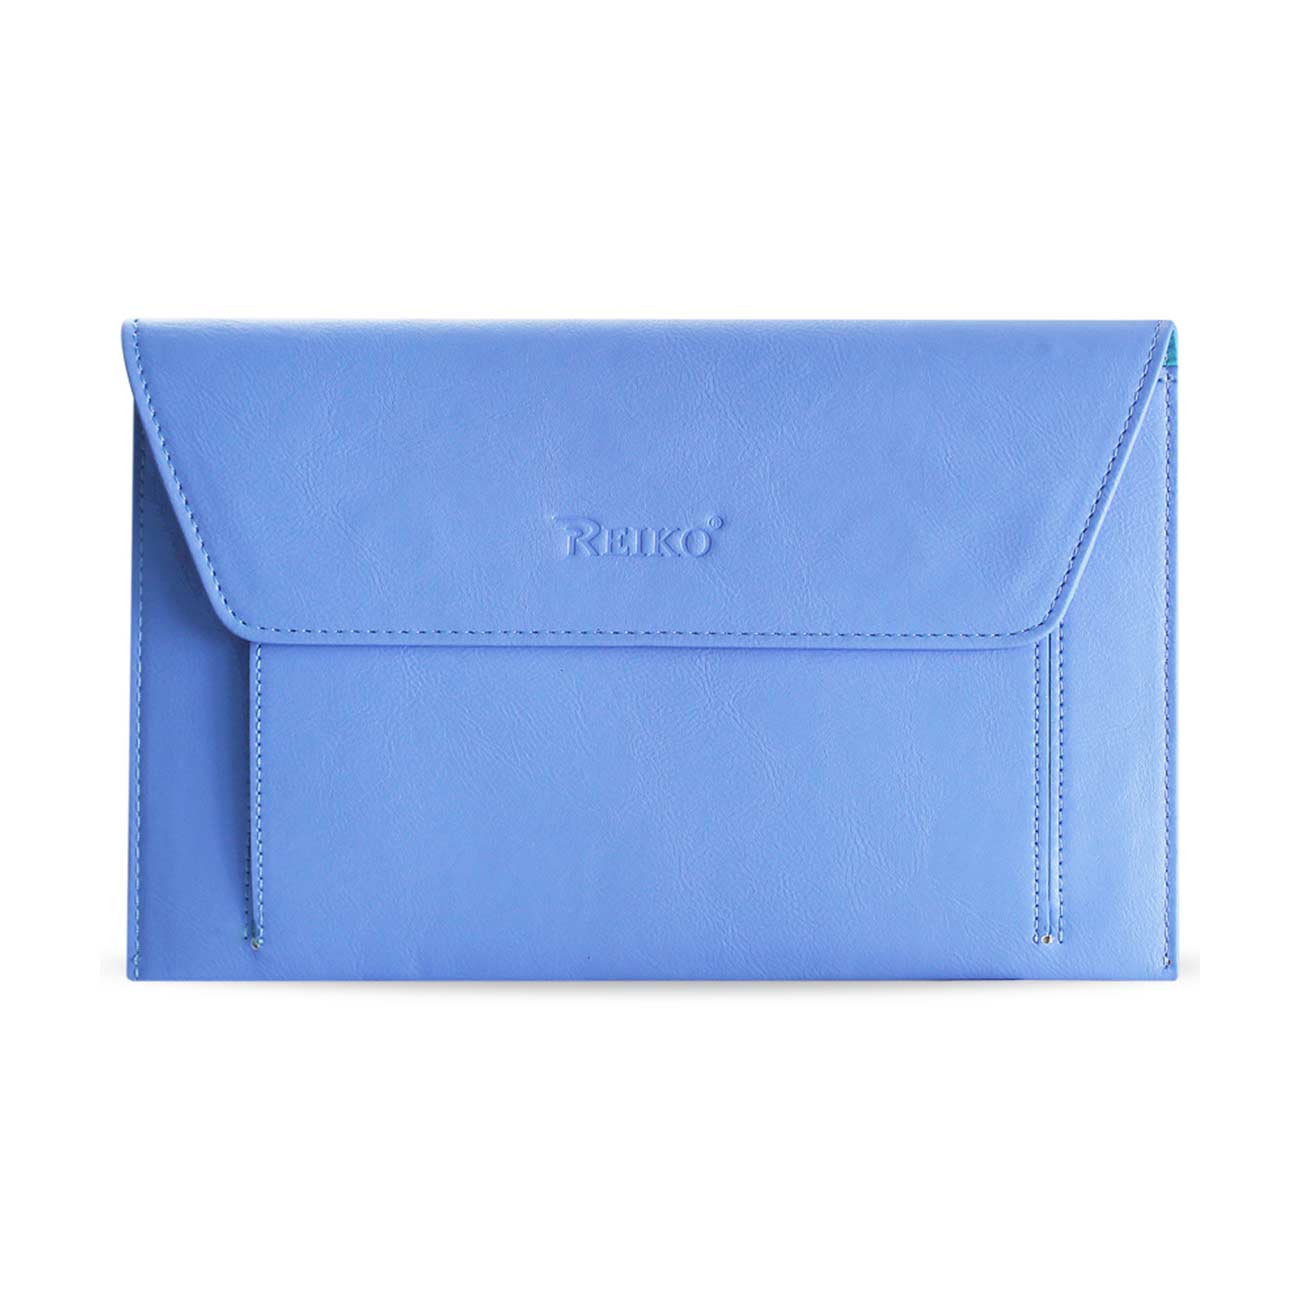 REIKO PREMIUM LEATHER CASE POUCH FOR 11.6INCHES IPADS AND TABLETS In BLUE